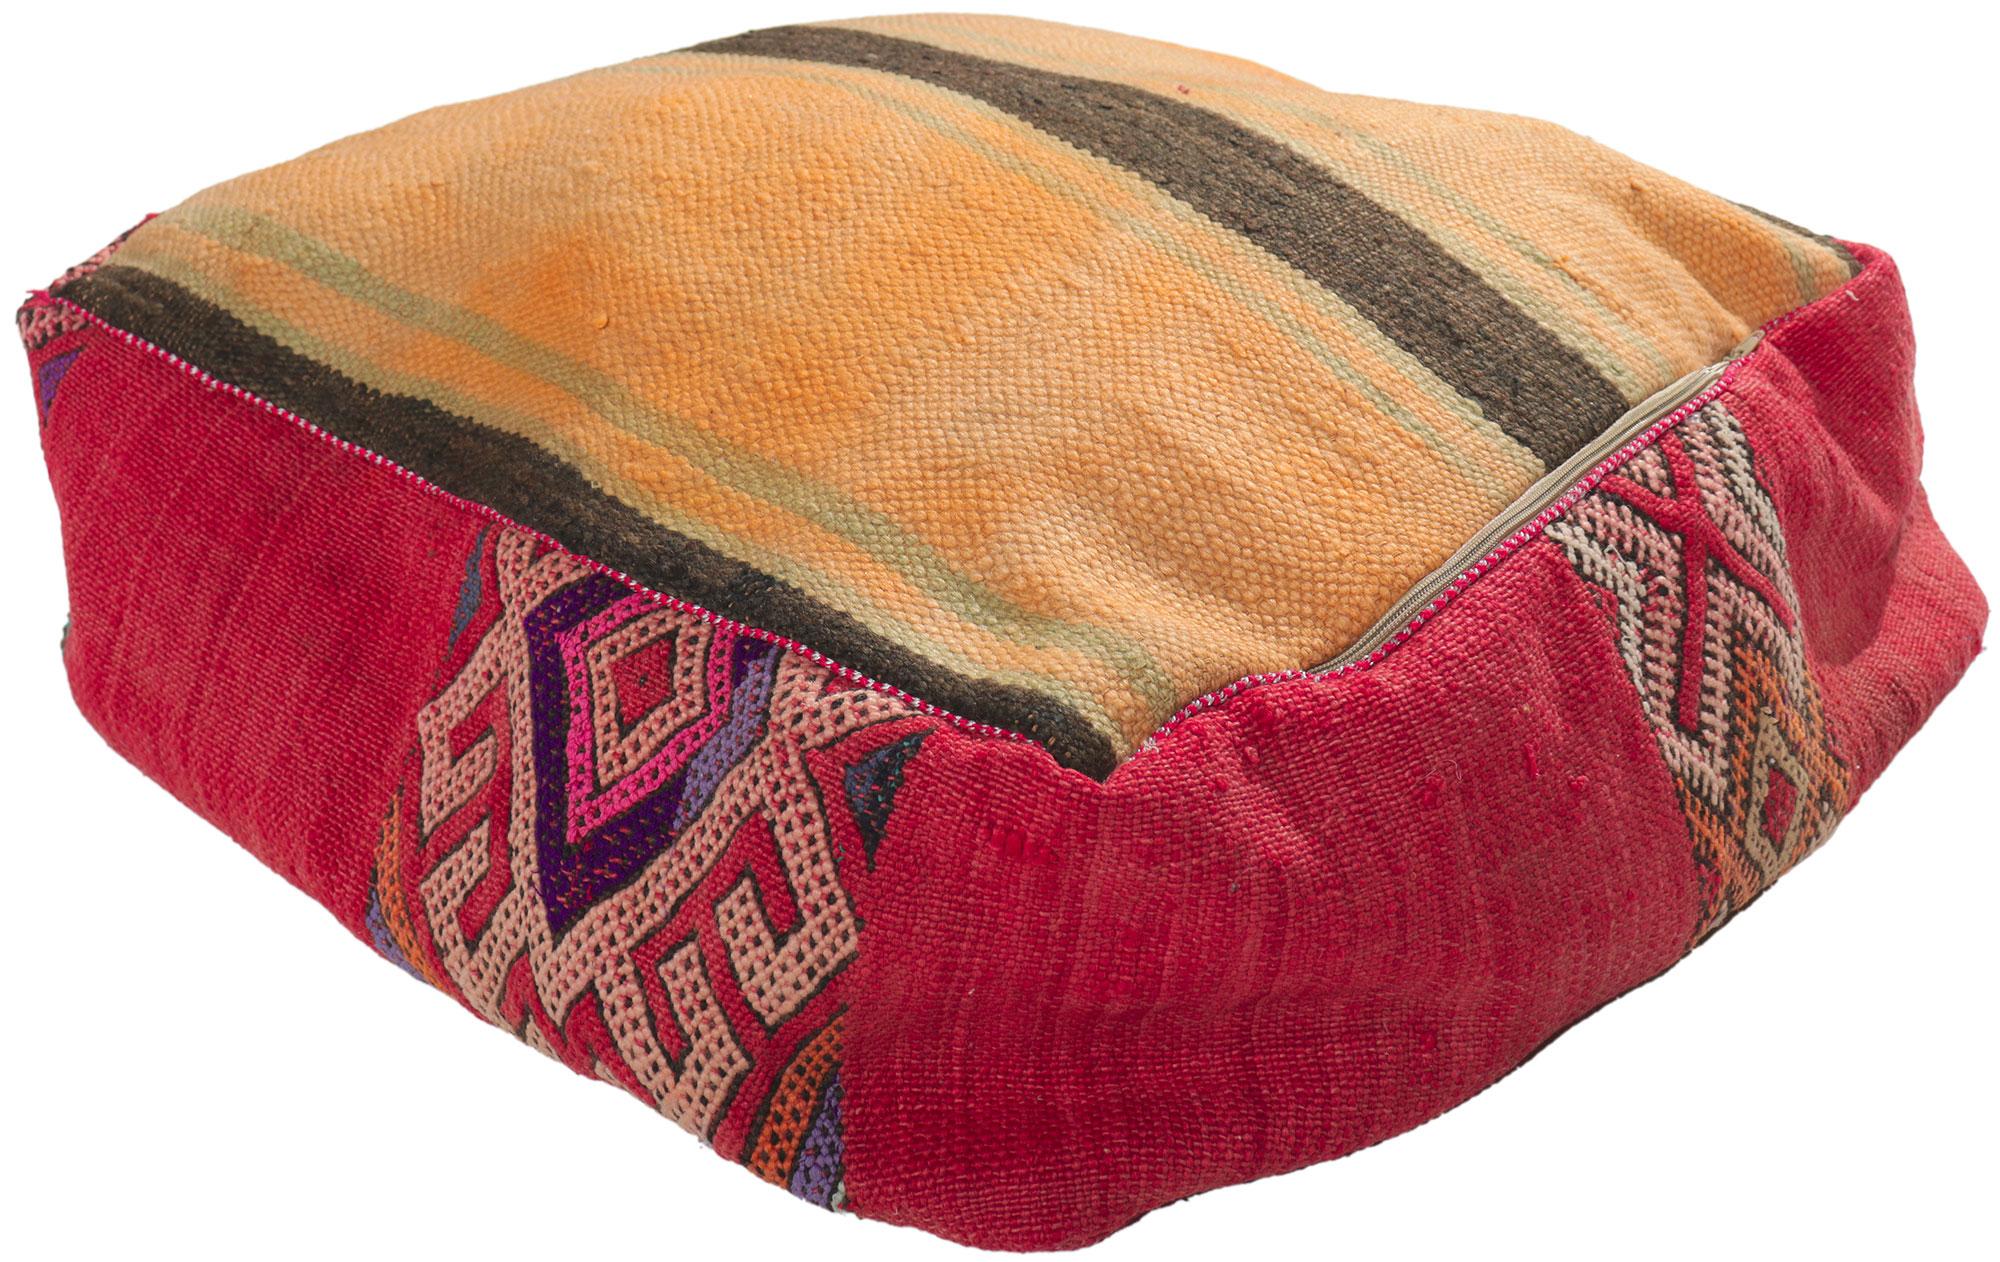 78439 Moroccan Vintage Kilim Pouf Ottoman, 2 x 2 x 1. Emanating nomadic charm with elements of comfort and functional versatility, this vintage Moroccan pouf conjures the spirit of Morocco. Made by talented artisans from the Atas Mountains of